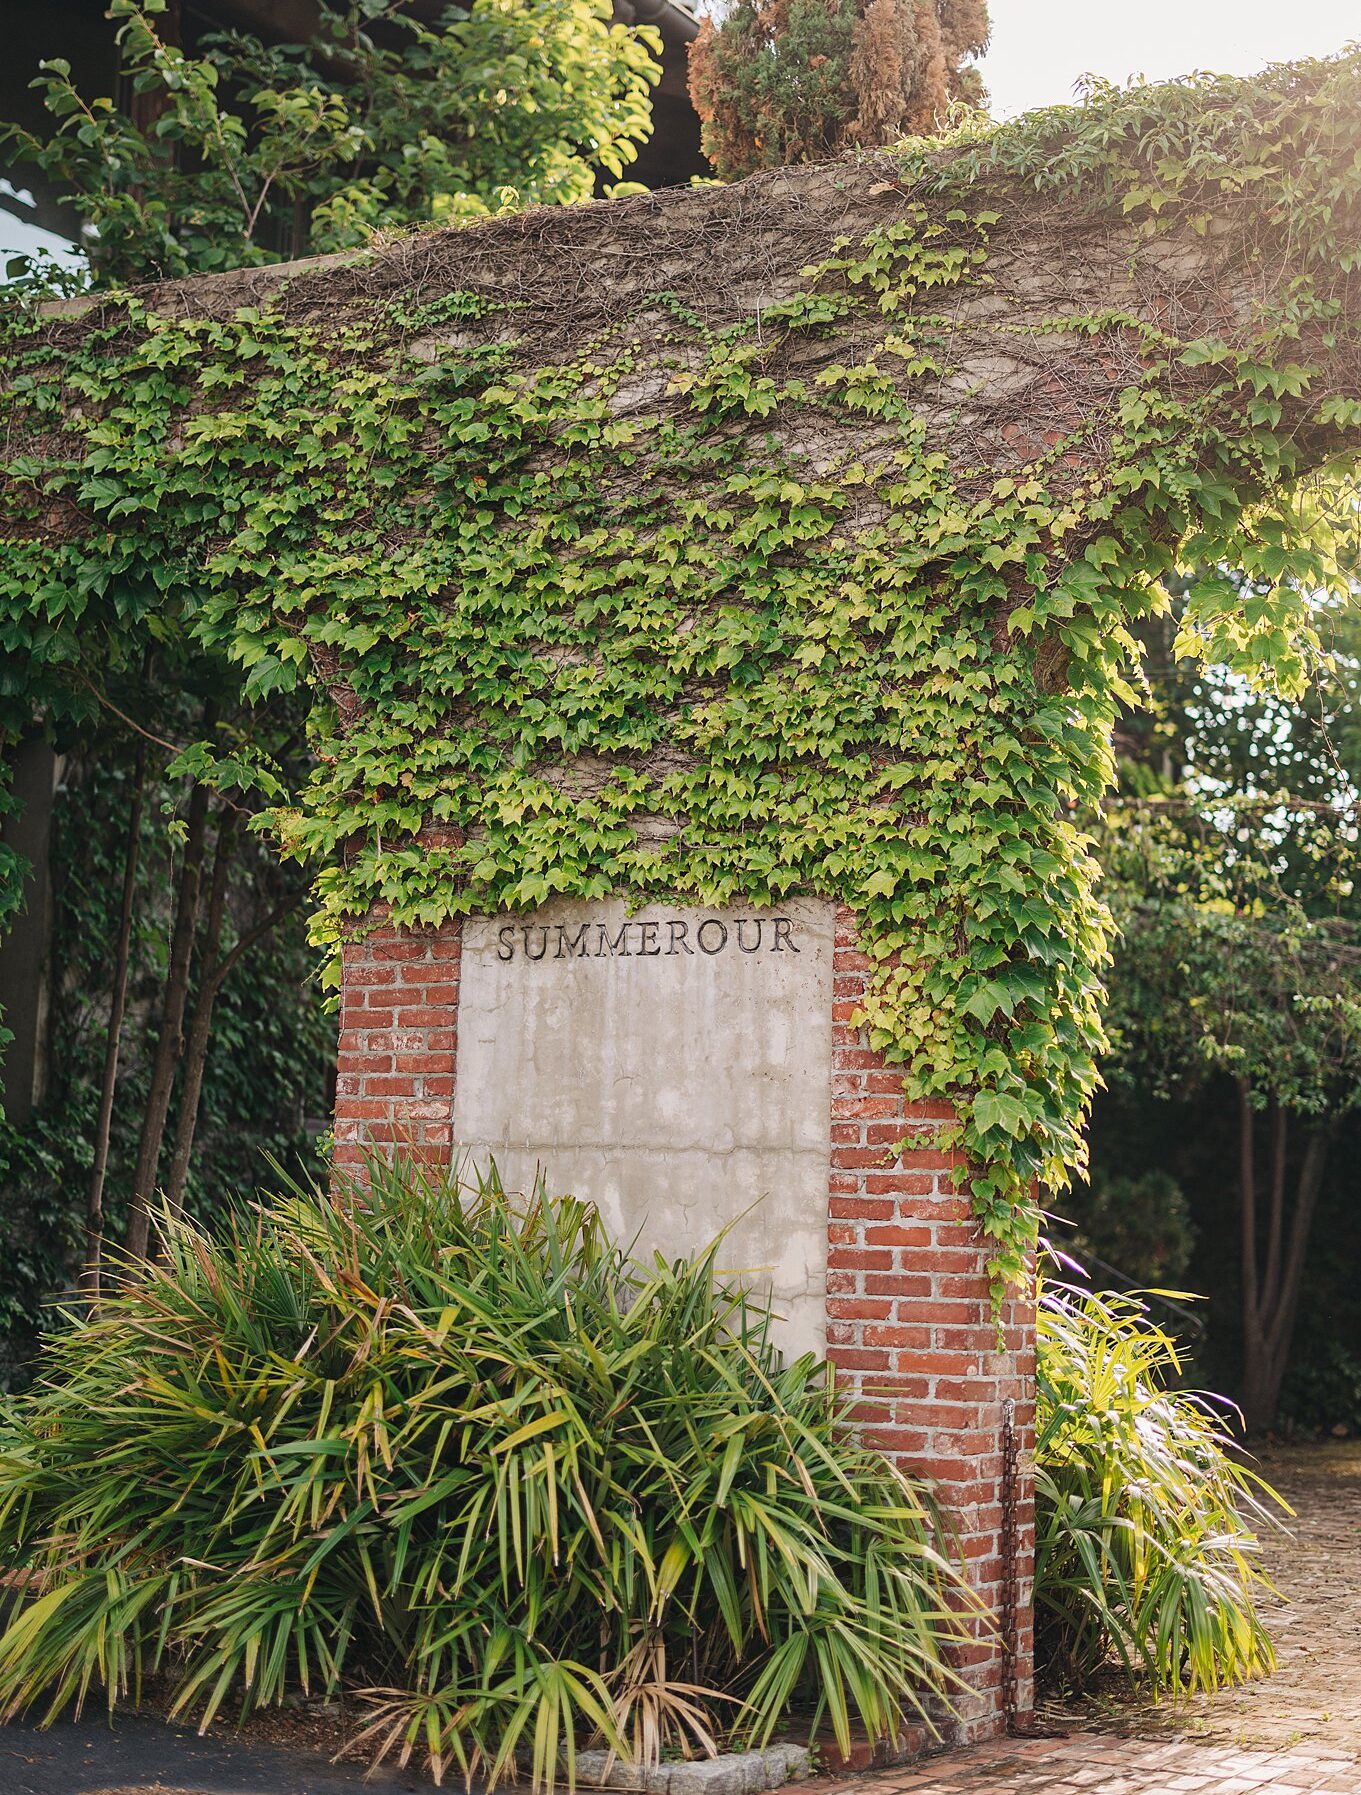 Details of the front entrance sign of the summerour studio wedding venue covered in ivy